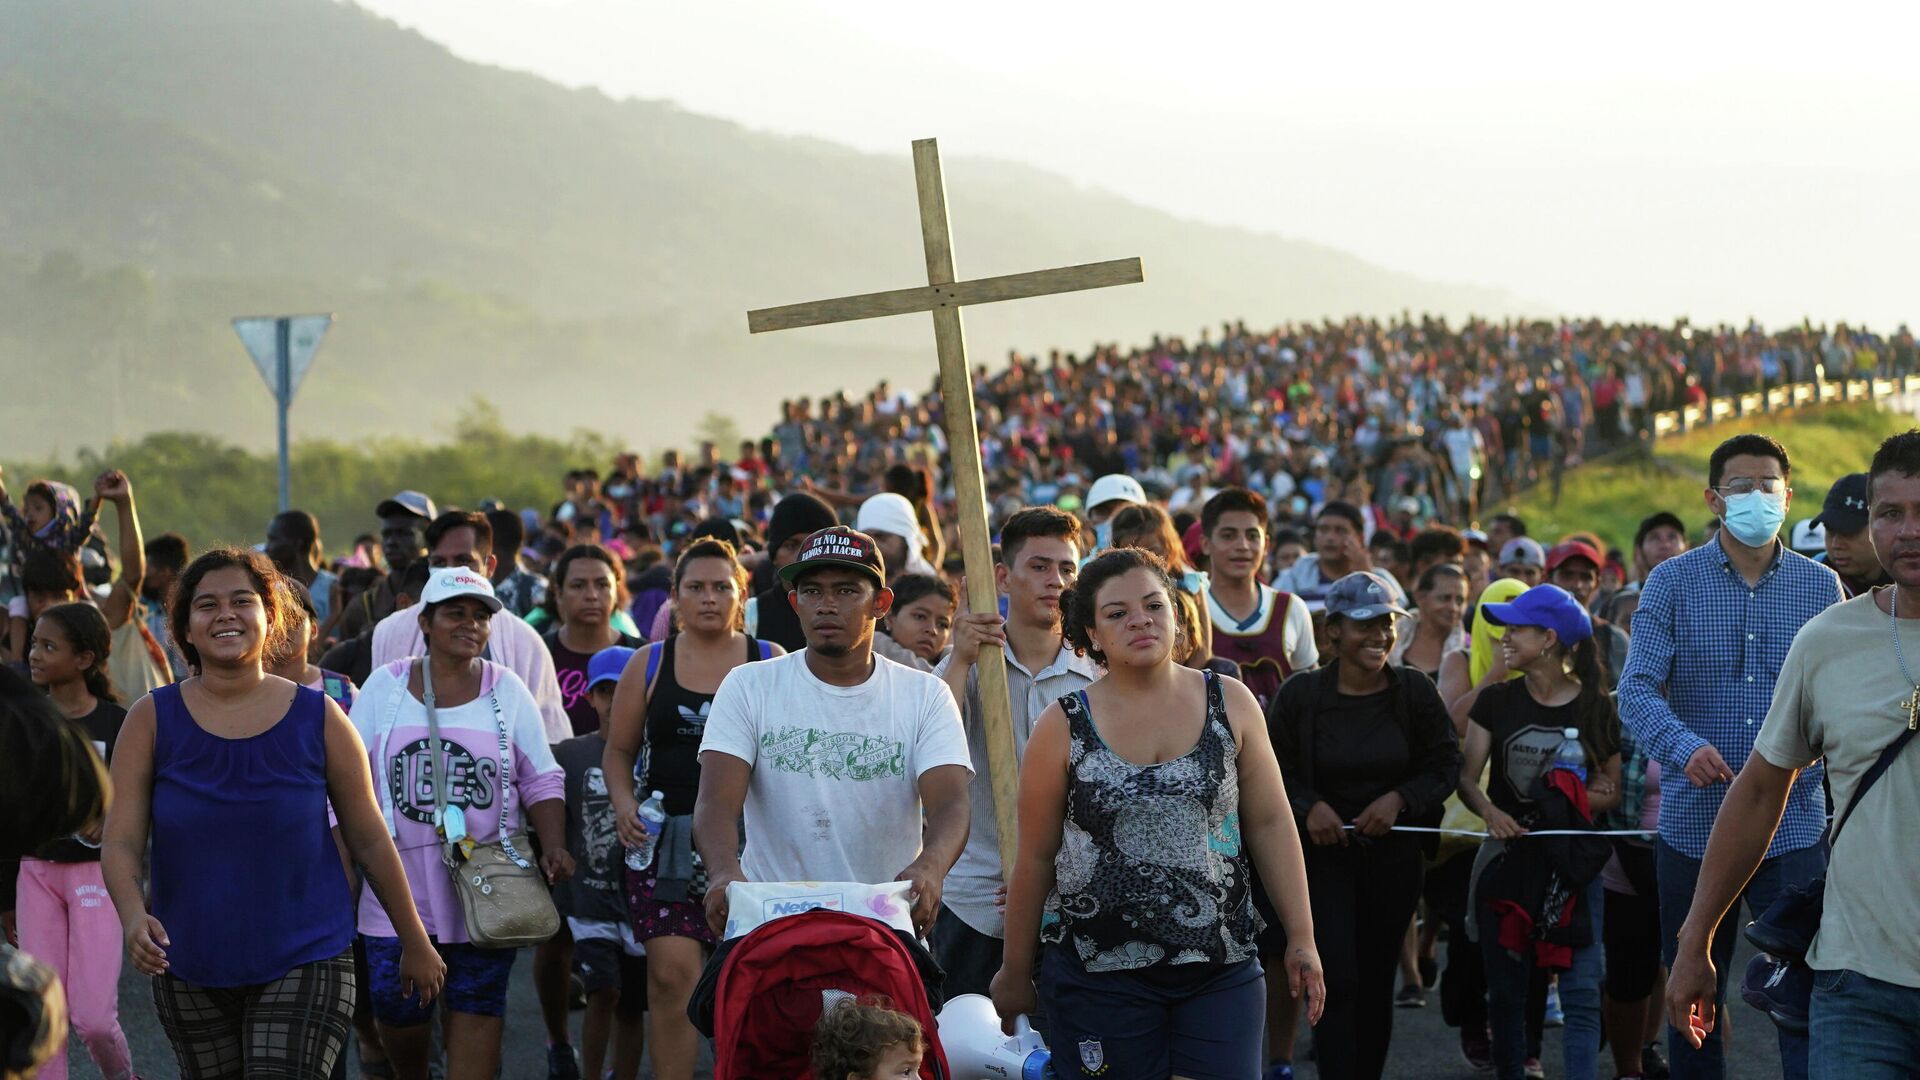 Migrants leave Huixtla, Chiapas state, Mexico, early Wednesday, Oct. 27, 2021, as they continue their trek north toward Mexico's northern states and the U.S. border. - Sputnik International, 1920, 09.11.2021